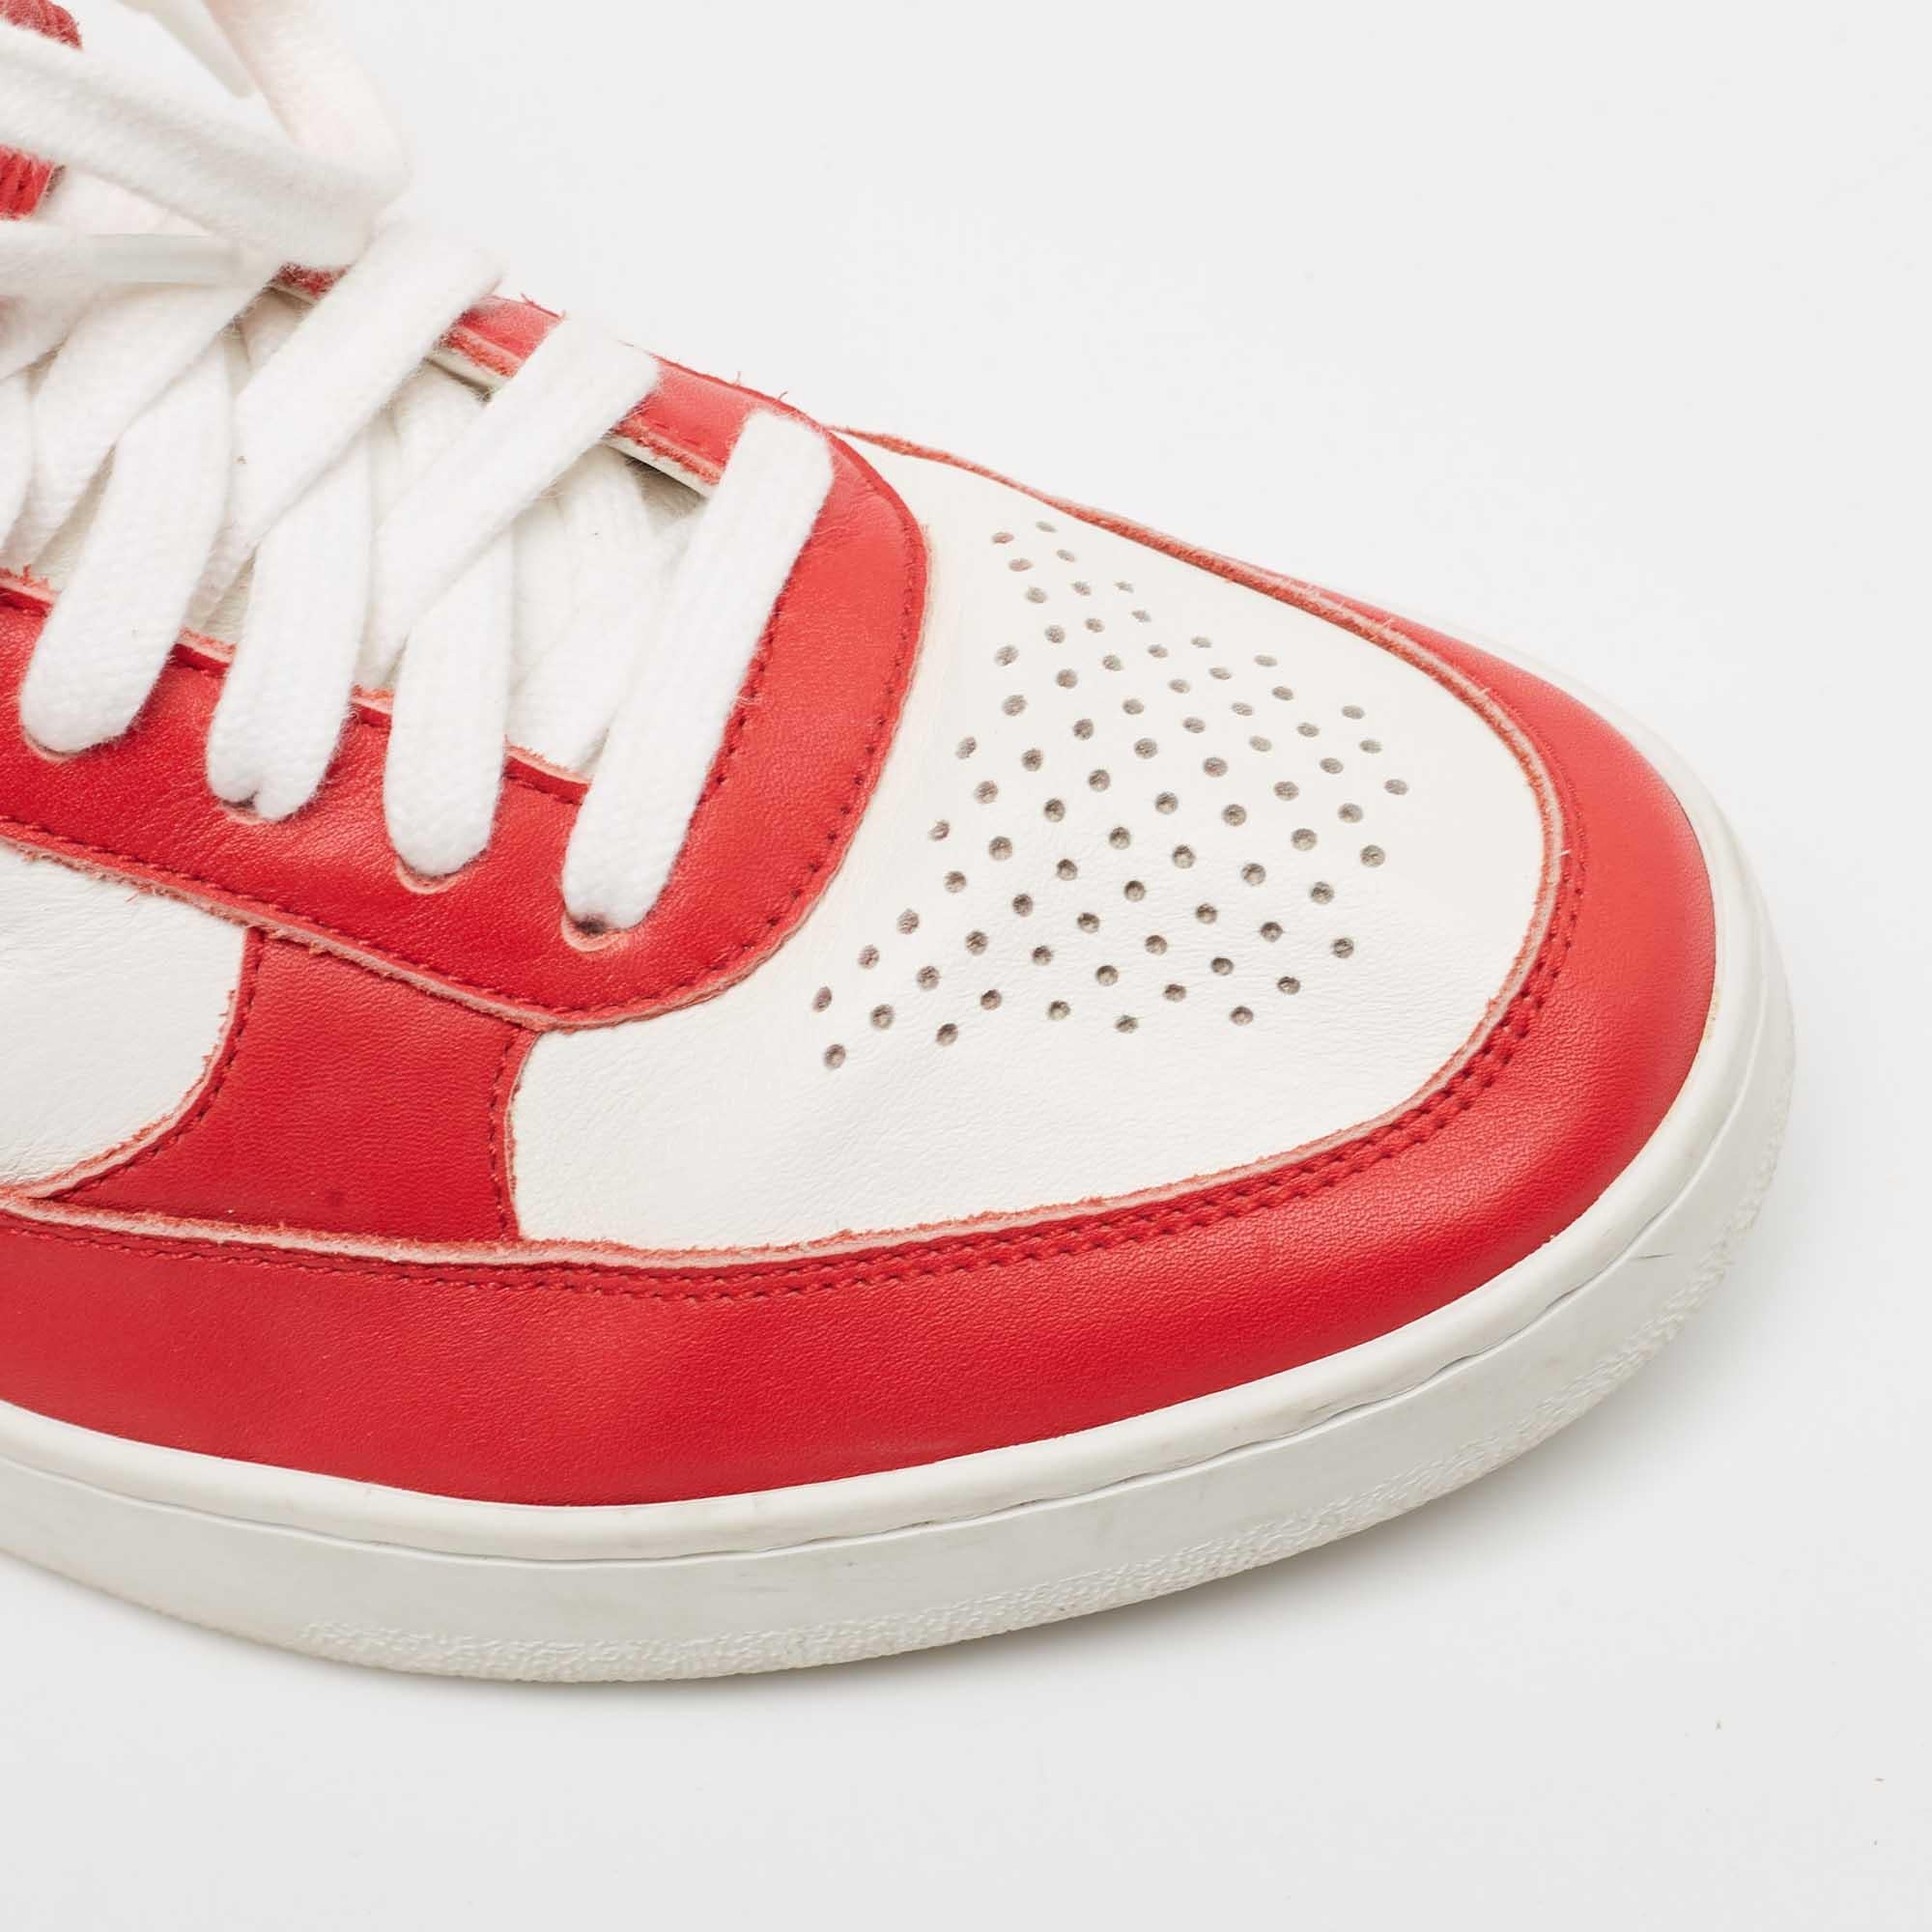 Celine Red/White Leather High Top Sneakers Size 38 For Sale 1